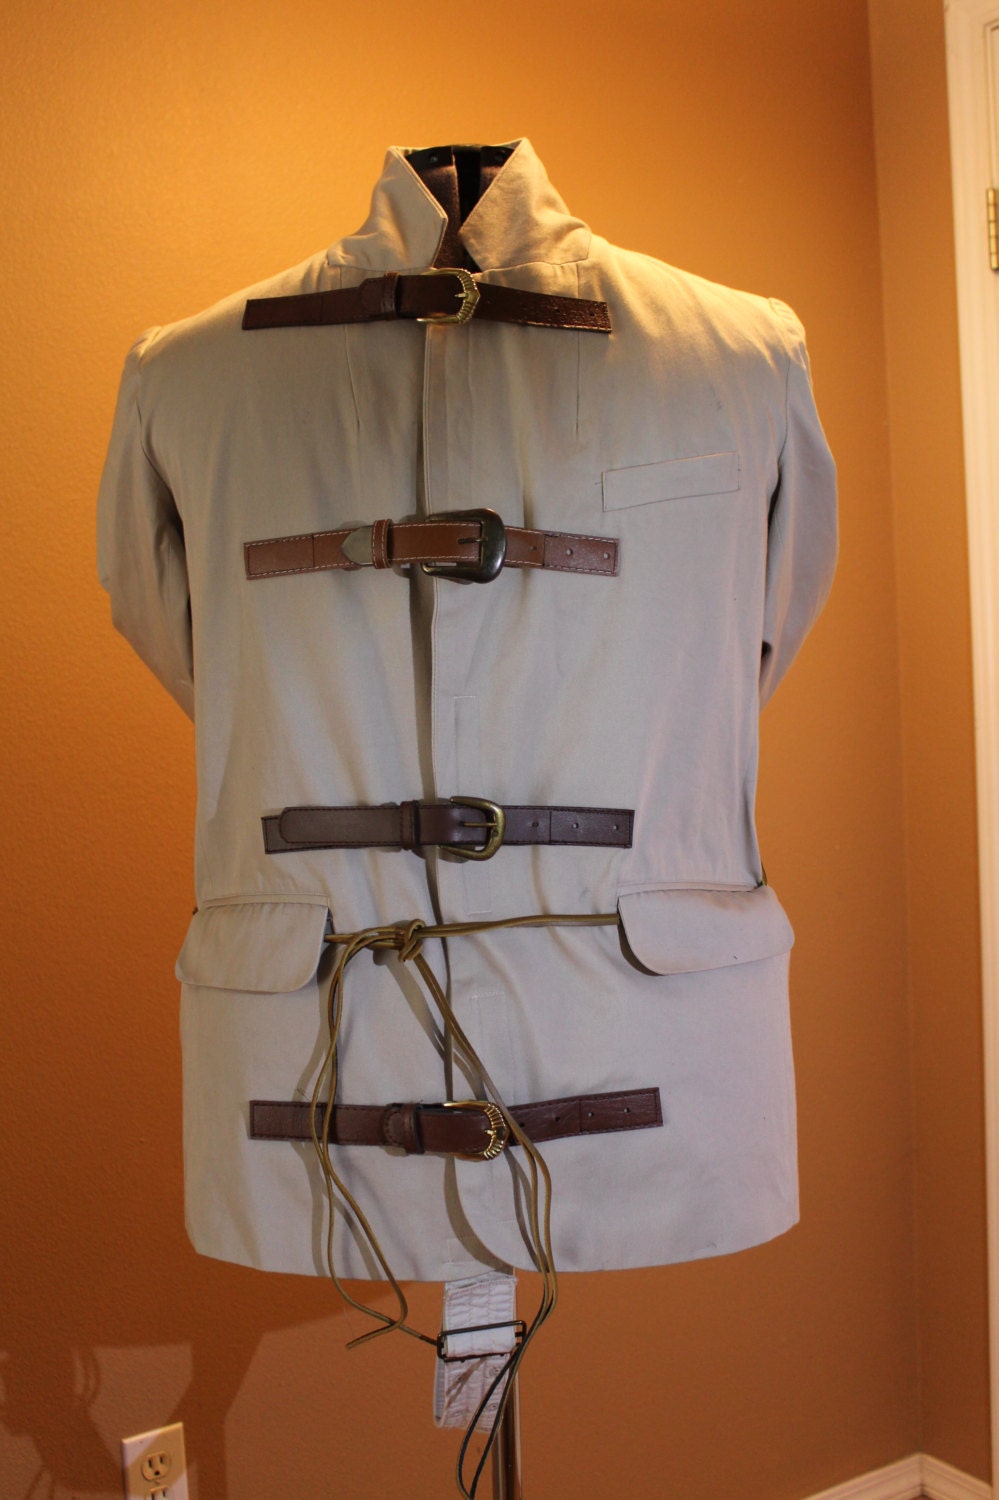 How to make a straight jacket